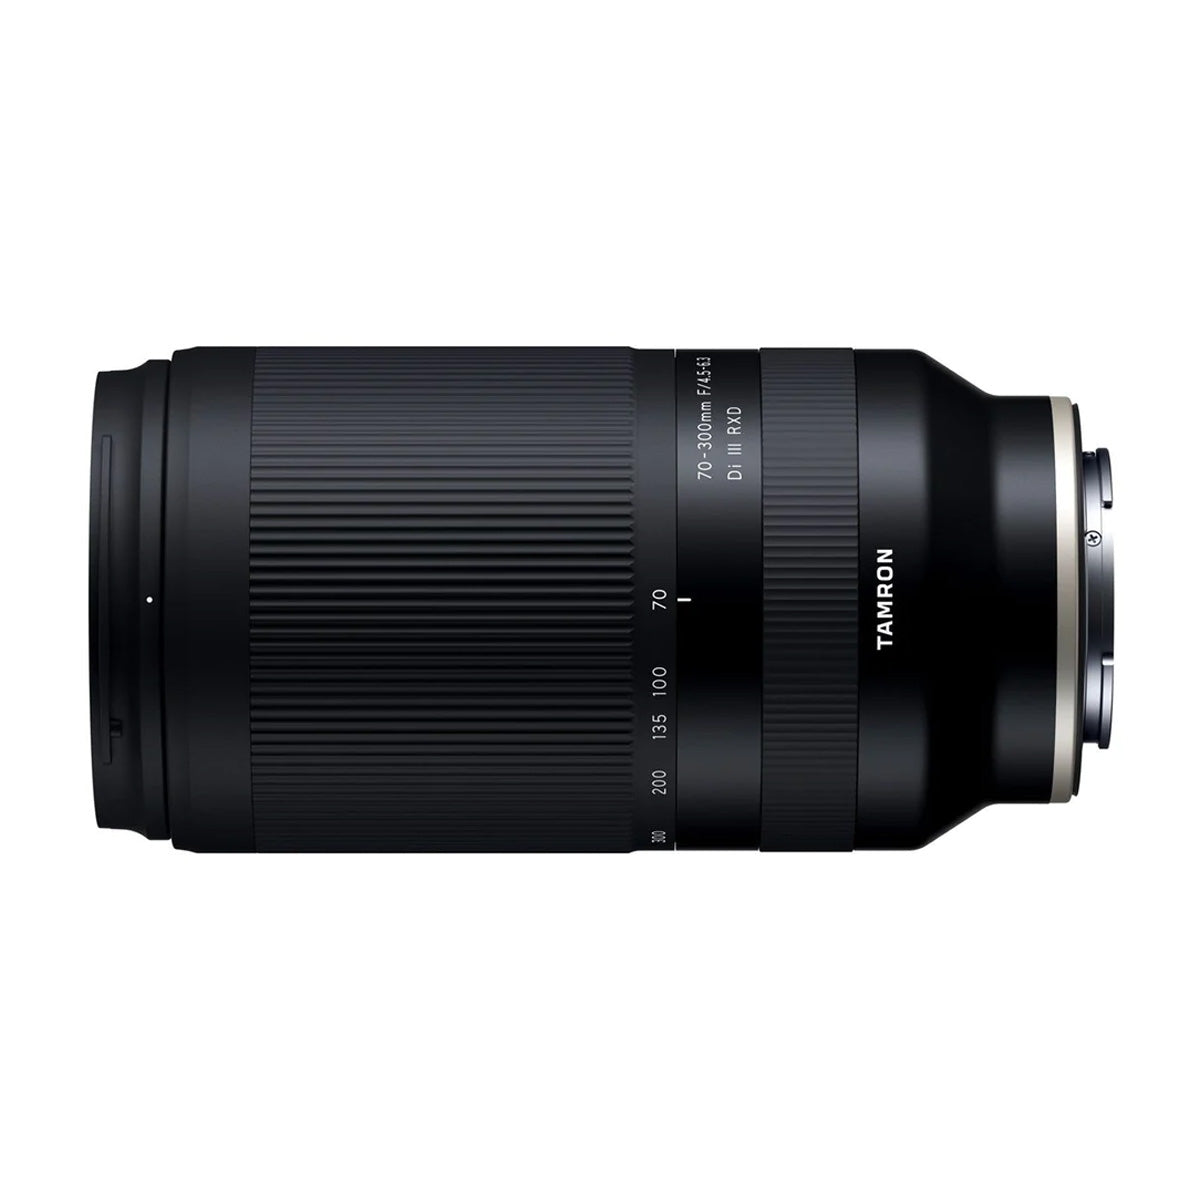 Product Image of Tamron 70-300mm F4.5-6.3 Di III RXD Sony FE Lens - Side View